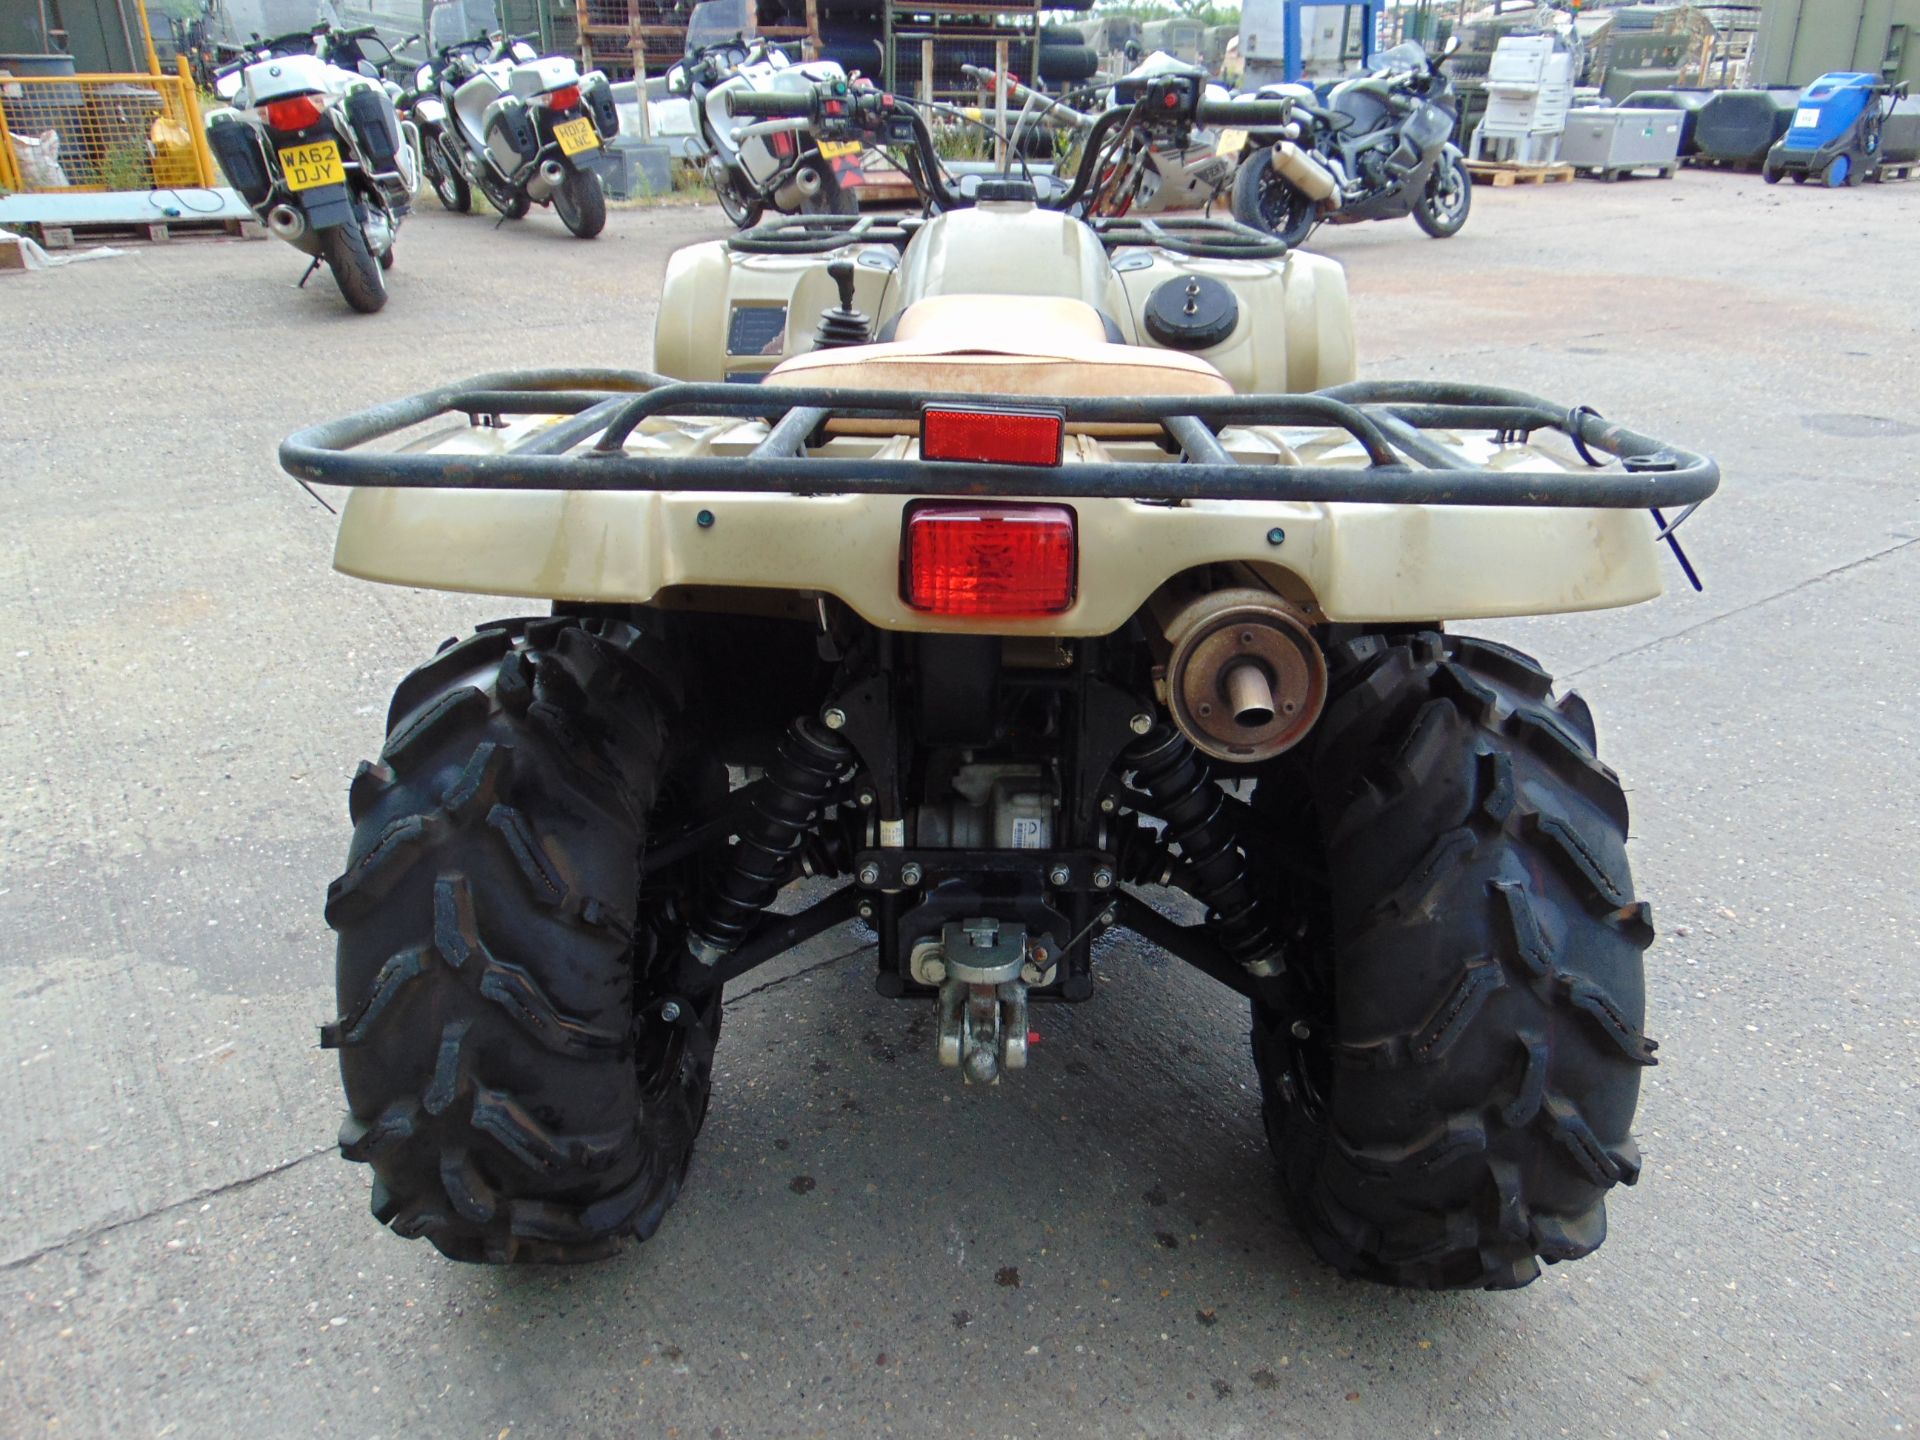 Military Specification Yamaha Grizzly 450 4 x 4 ATV Quad Bike ONLY 213 HOURS! - Image 7 of 18